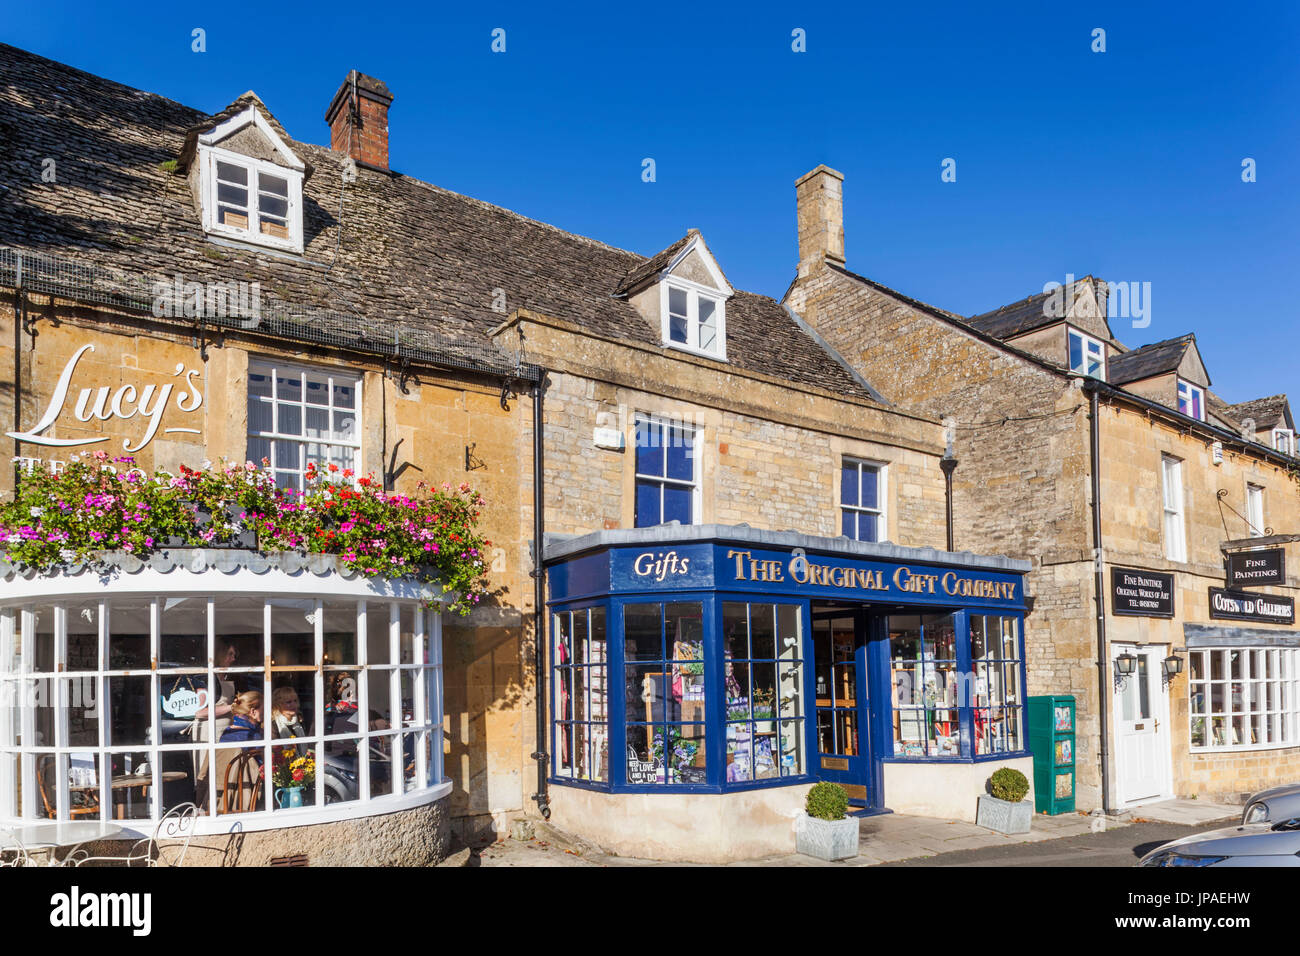 England, Gloucestershire, Cotswolds, Stow-on-the-Wold, Teashop and Gift Shop Stock Photo